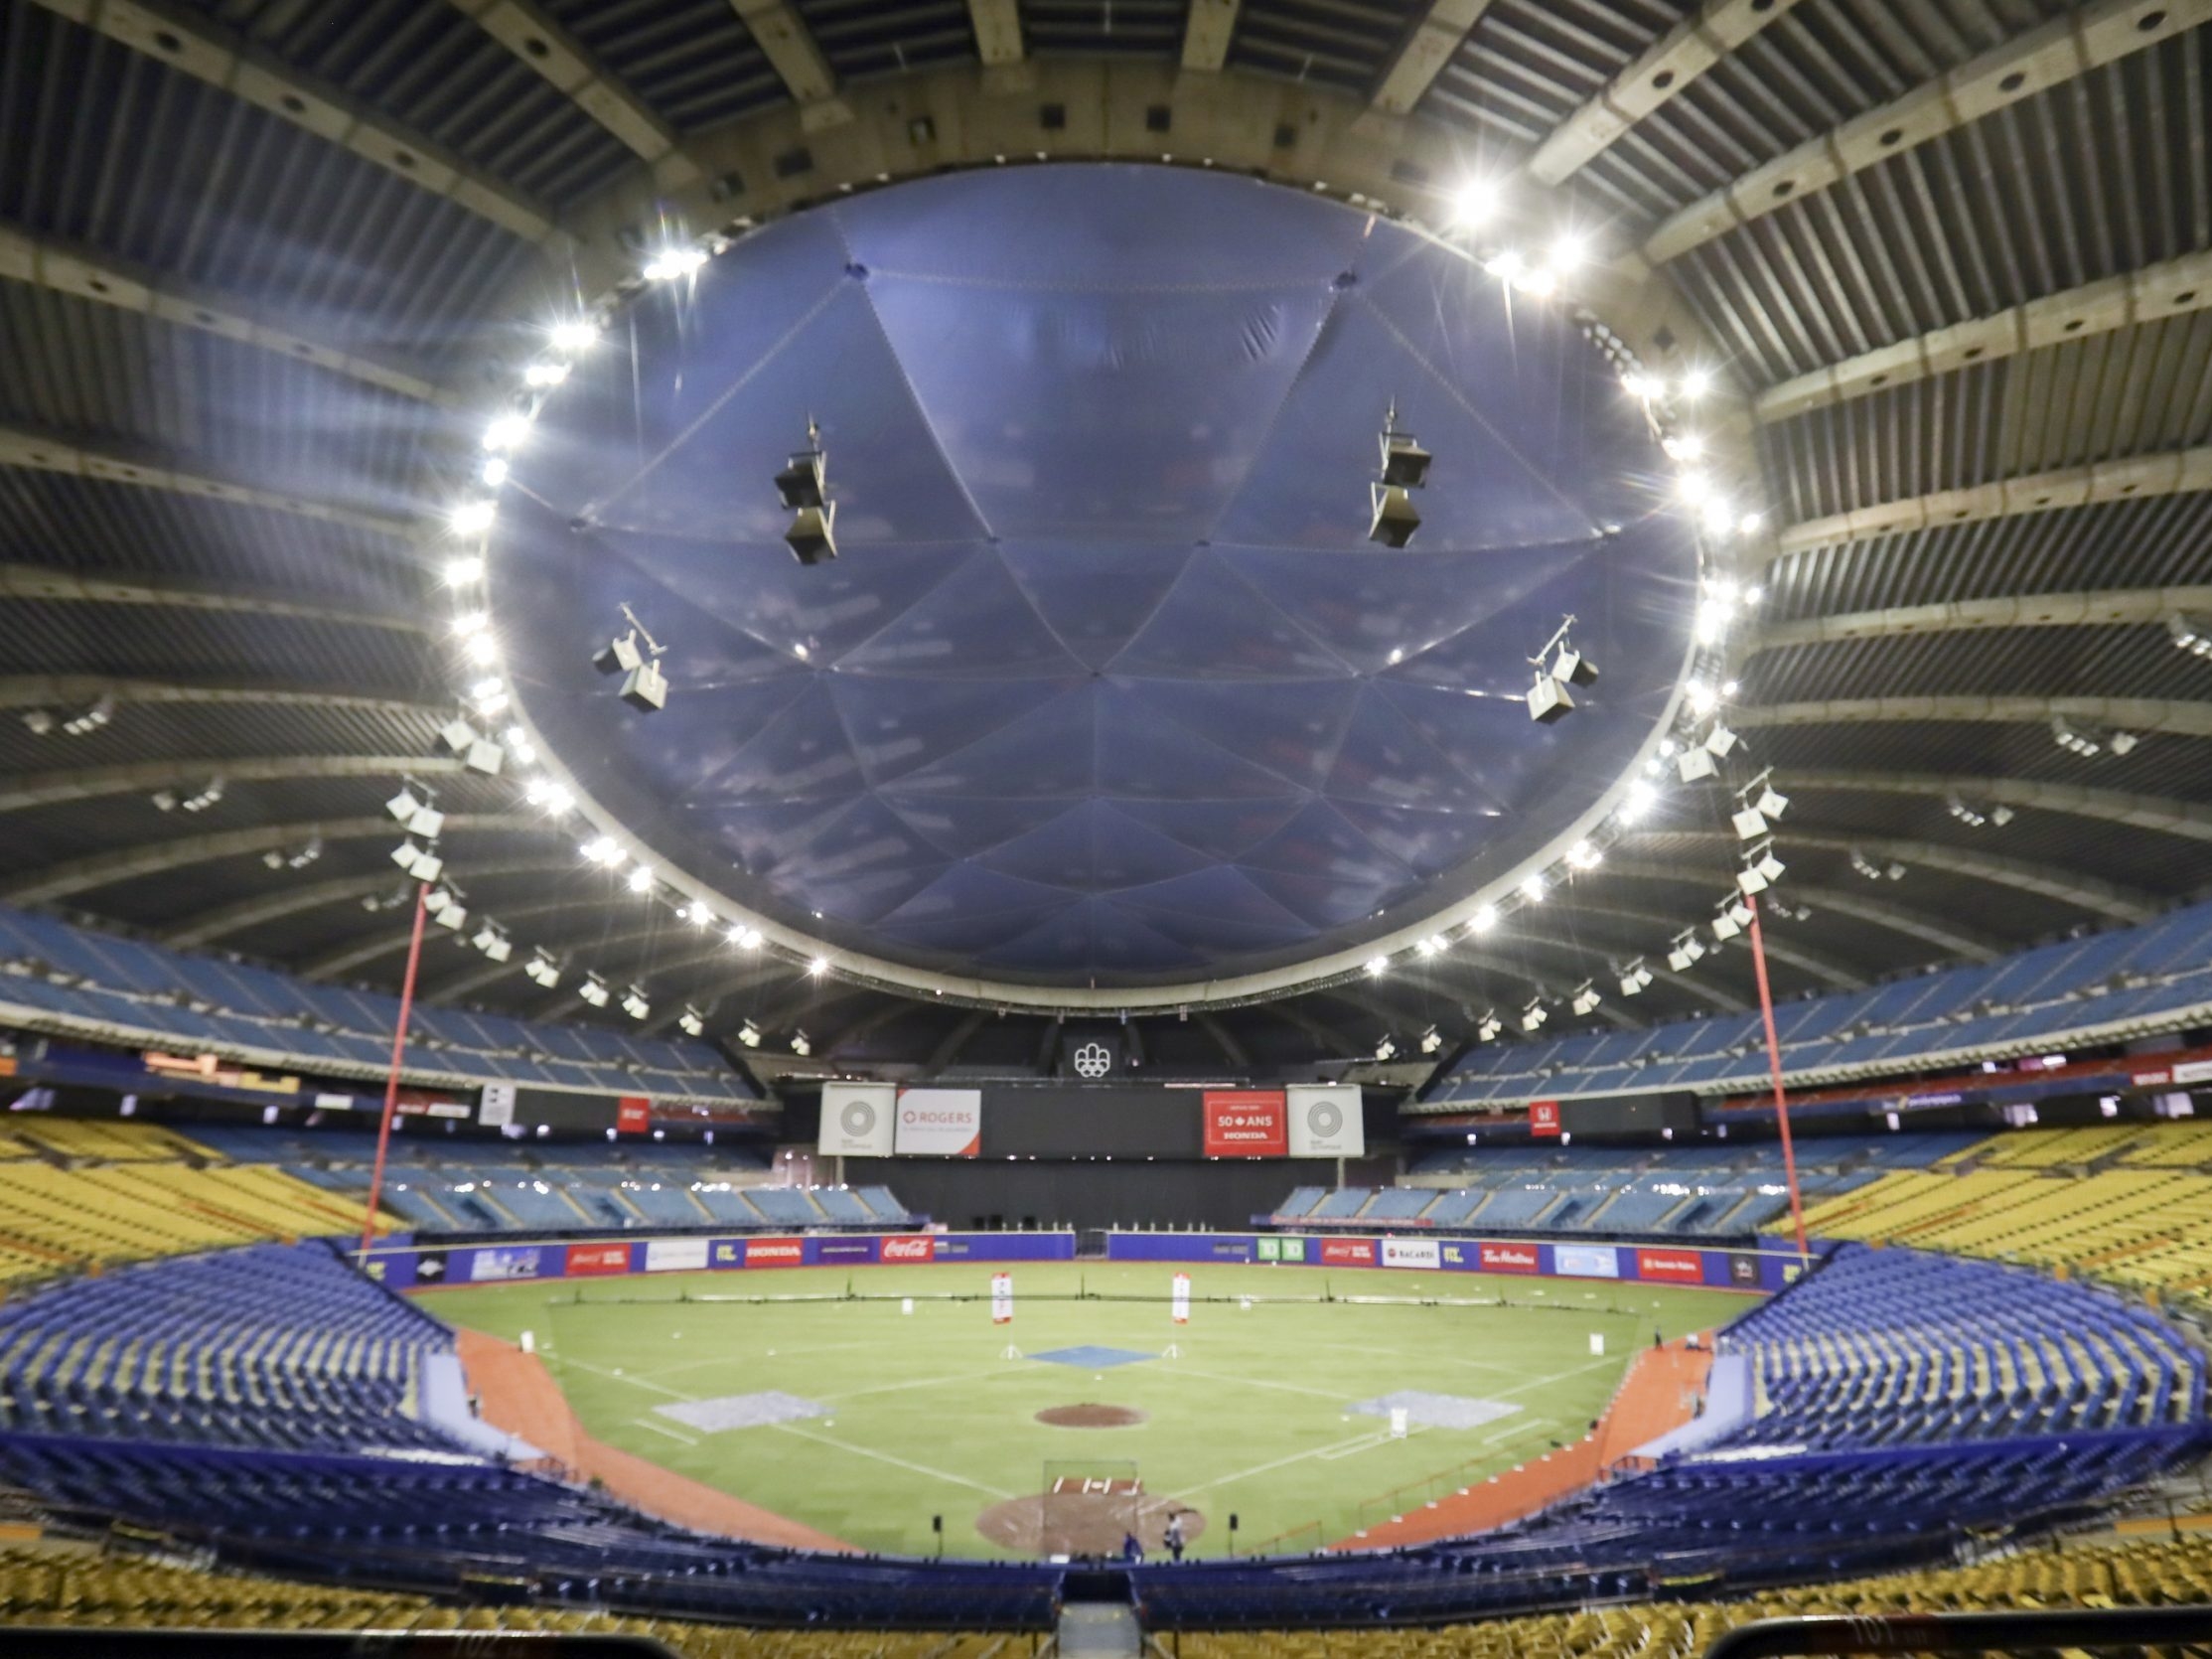 MLB players say Nashville is best spot for expansion, Montreal second